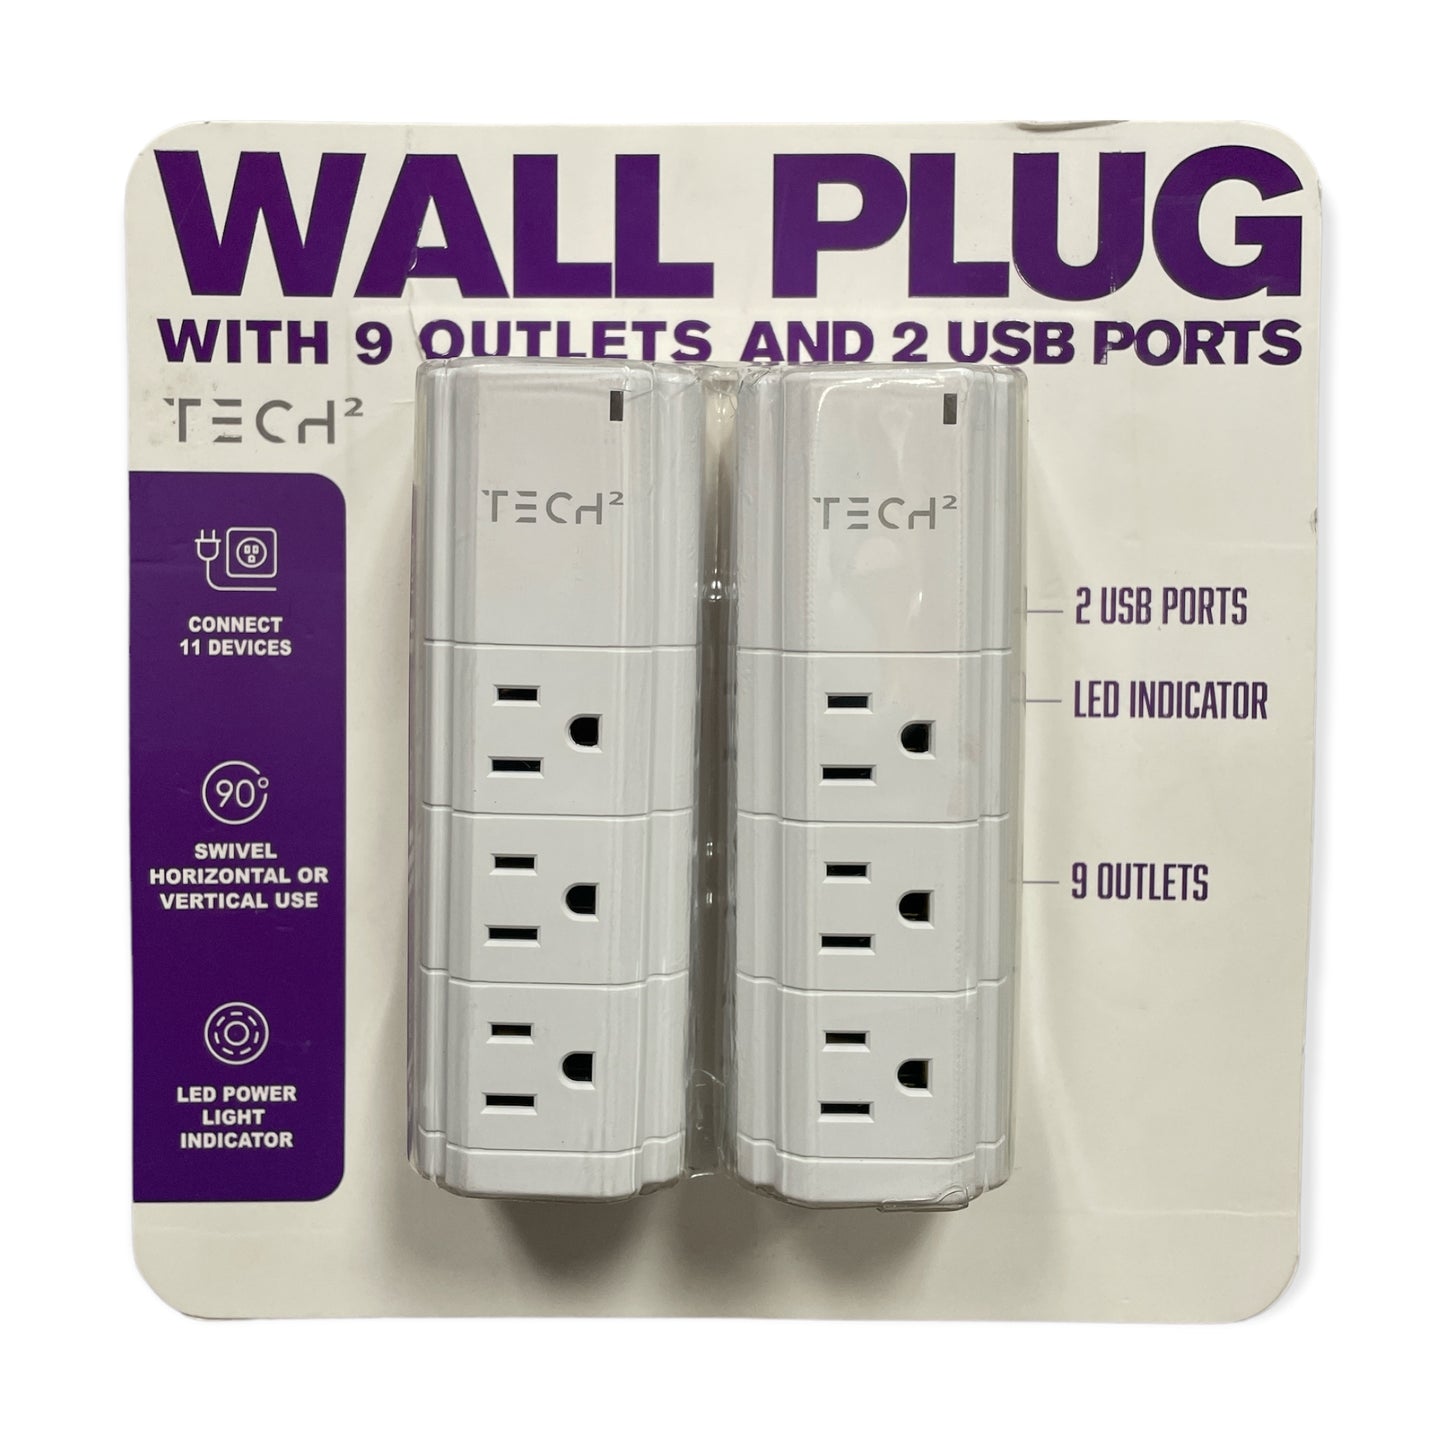 Tech2 9 Outlet 2 USB Port Wall Plug, 2 Pack, White